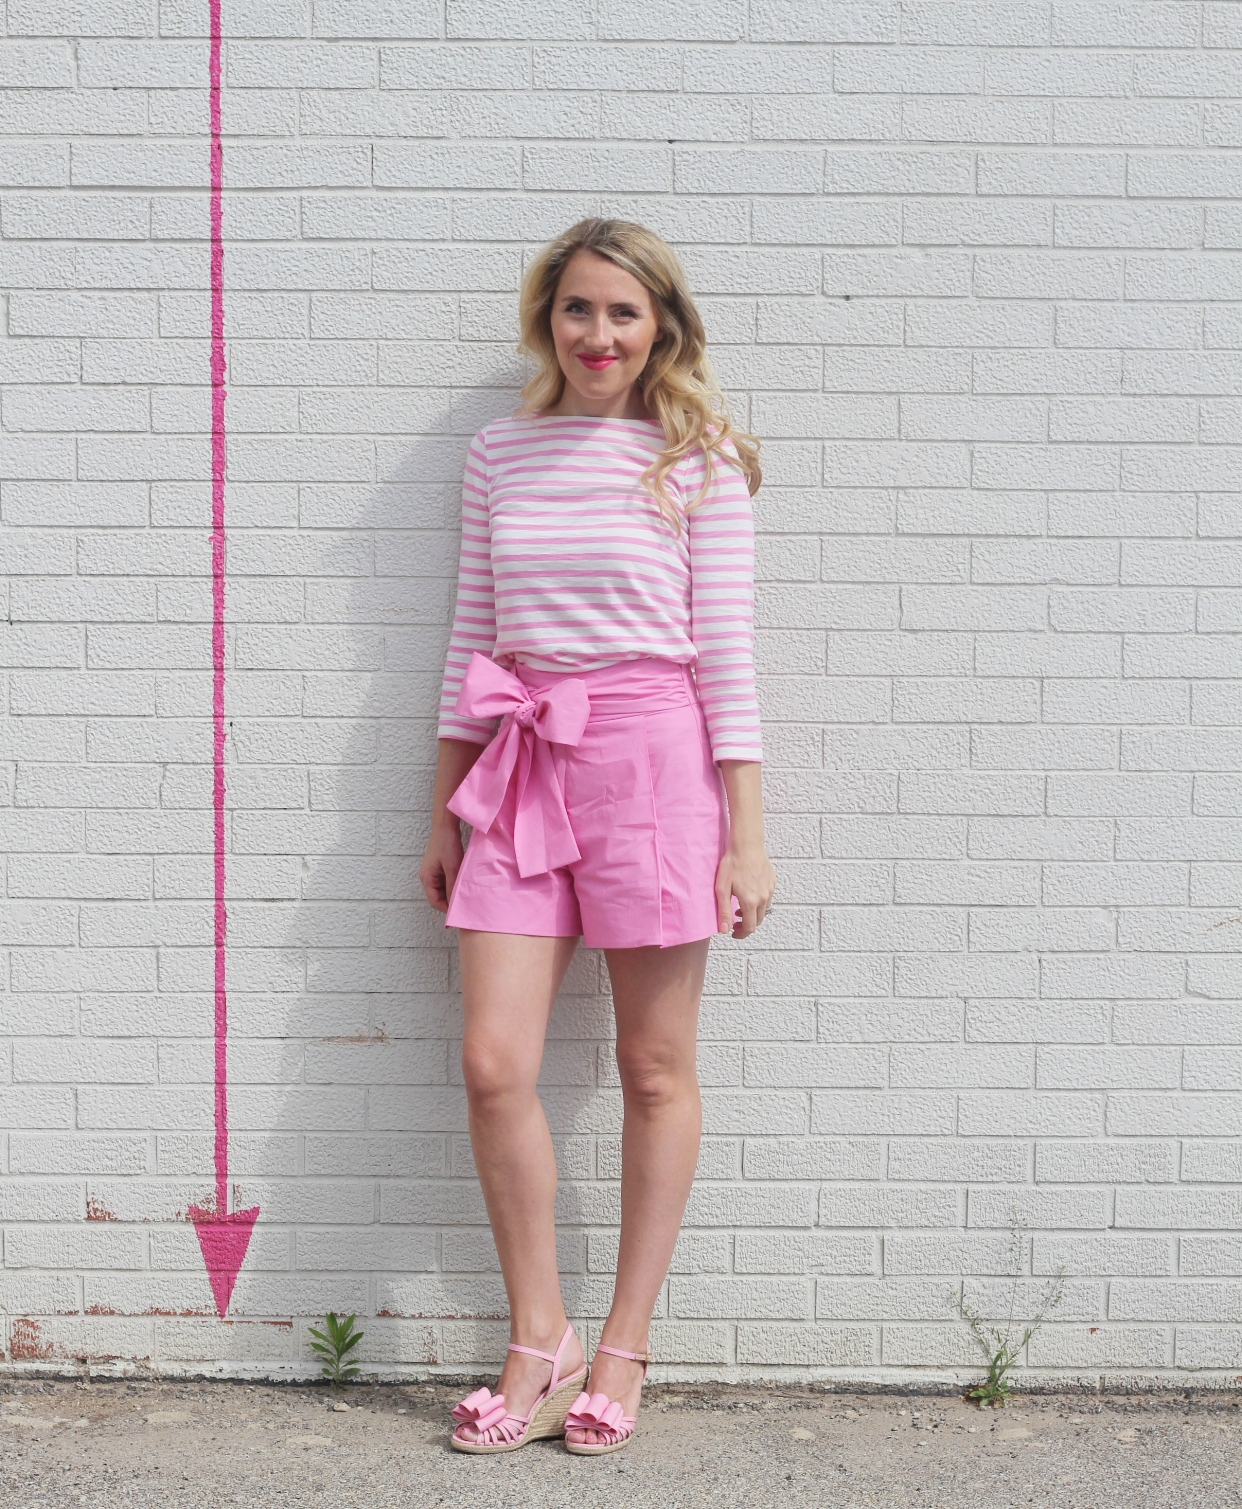 Pink bow shorts and striped top